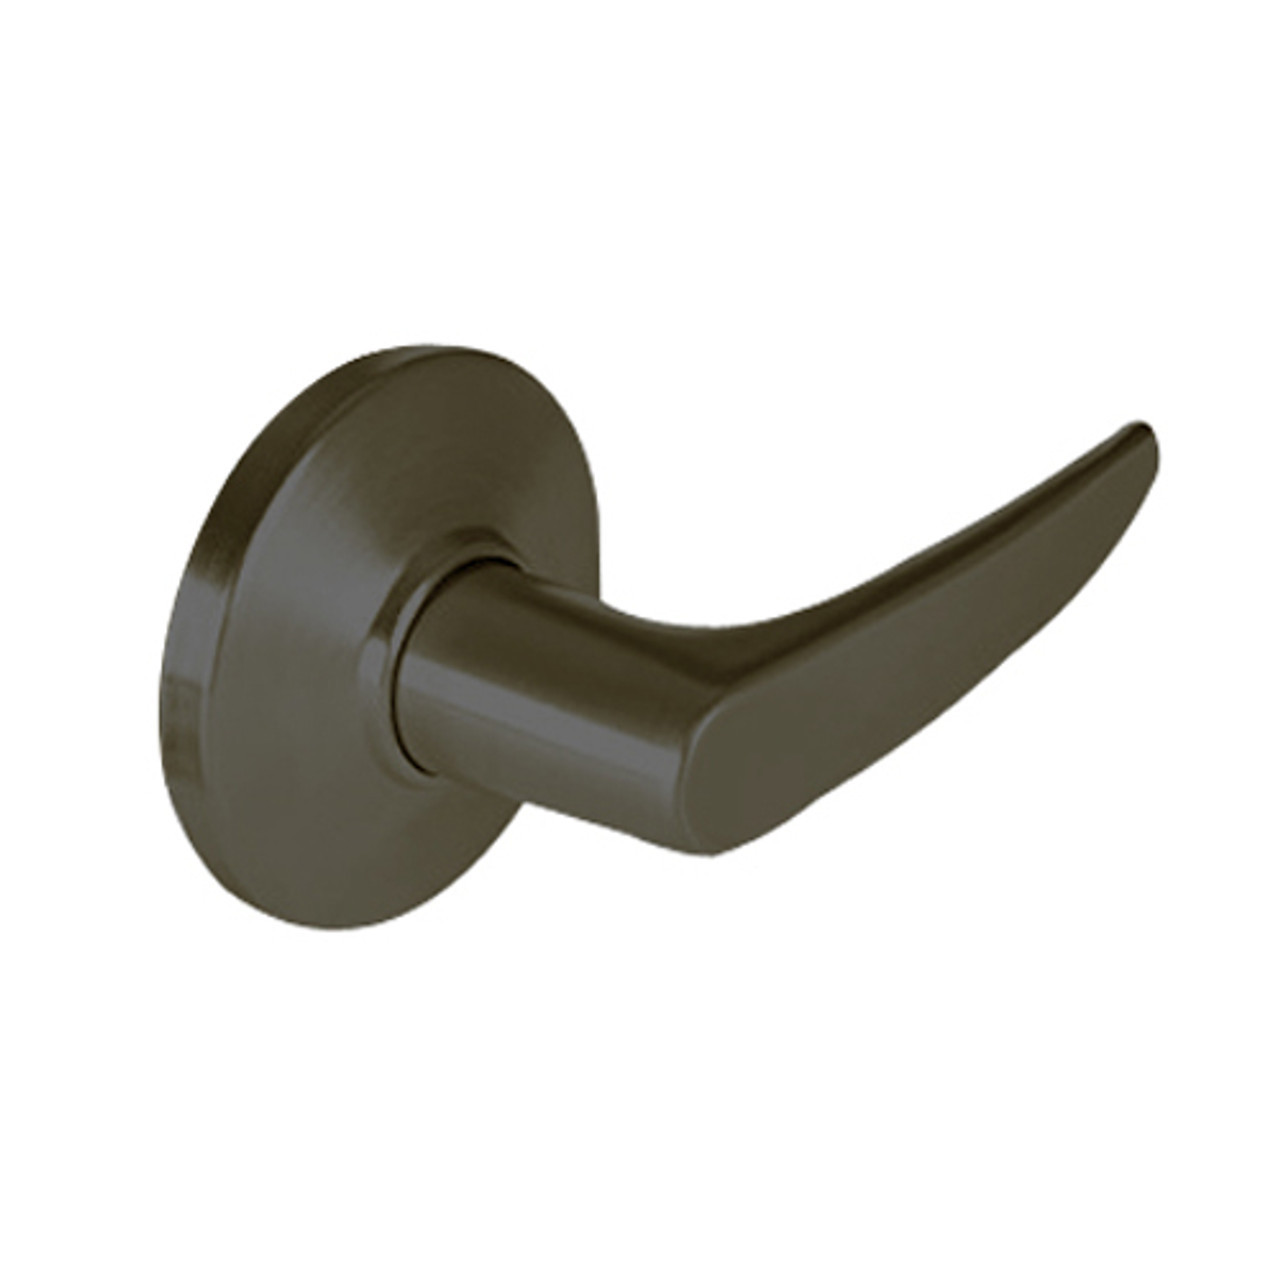 9K30M16DSTK613LM Best 9K Series Communicating Heavy Duty Cylindrical Lever Locks with Curved Without Return Lever Design in Oil Rubbed Bronze